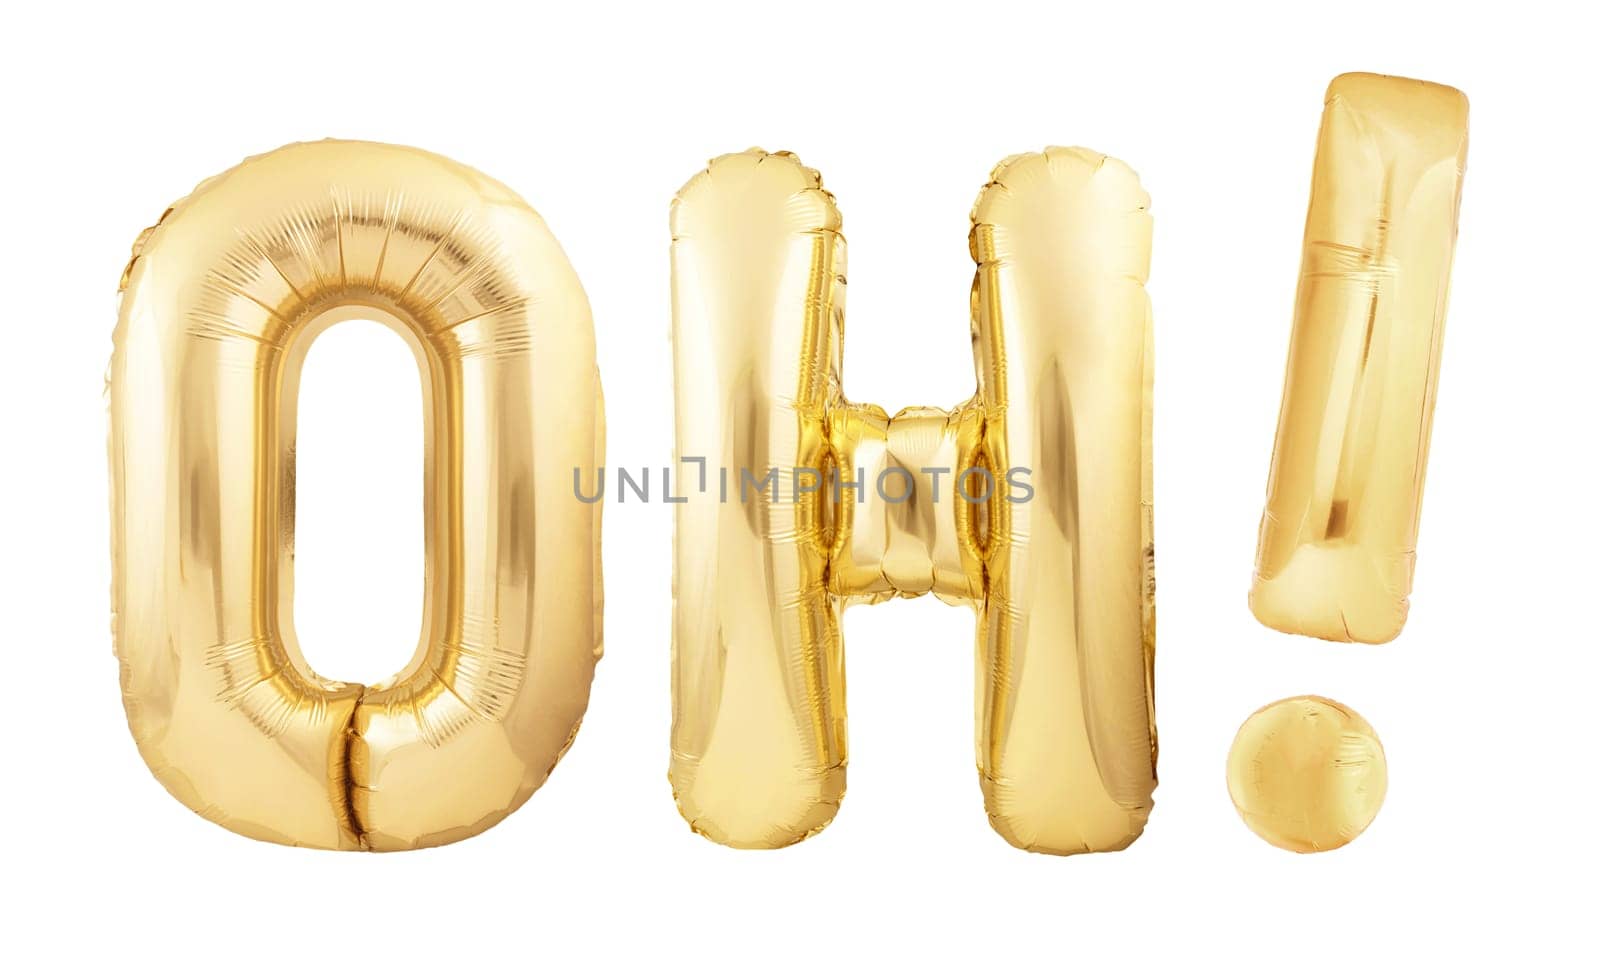 Oh! interjection with exclamation mark made of inflatable balloons isolated on white background by dmitryz